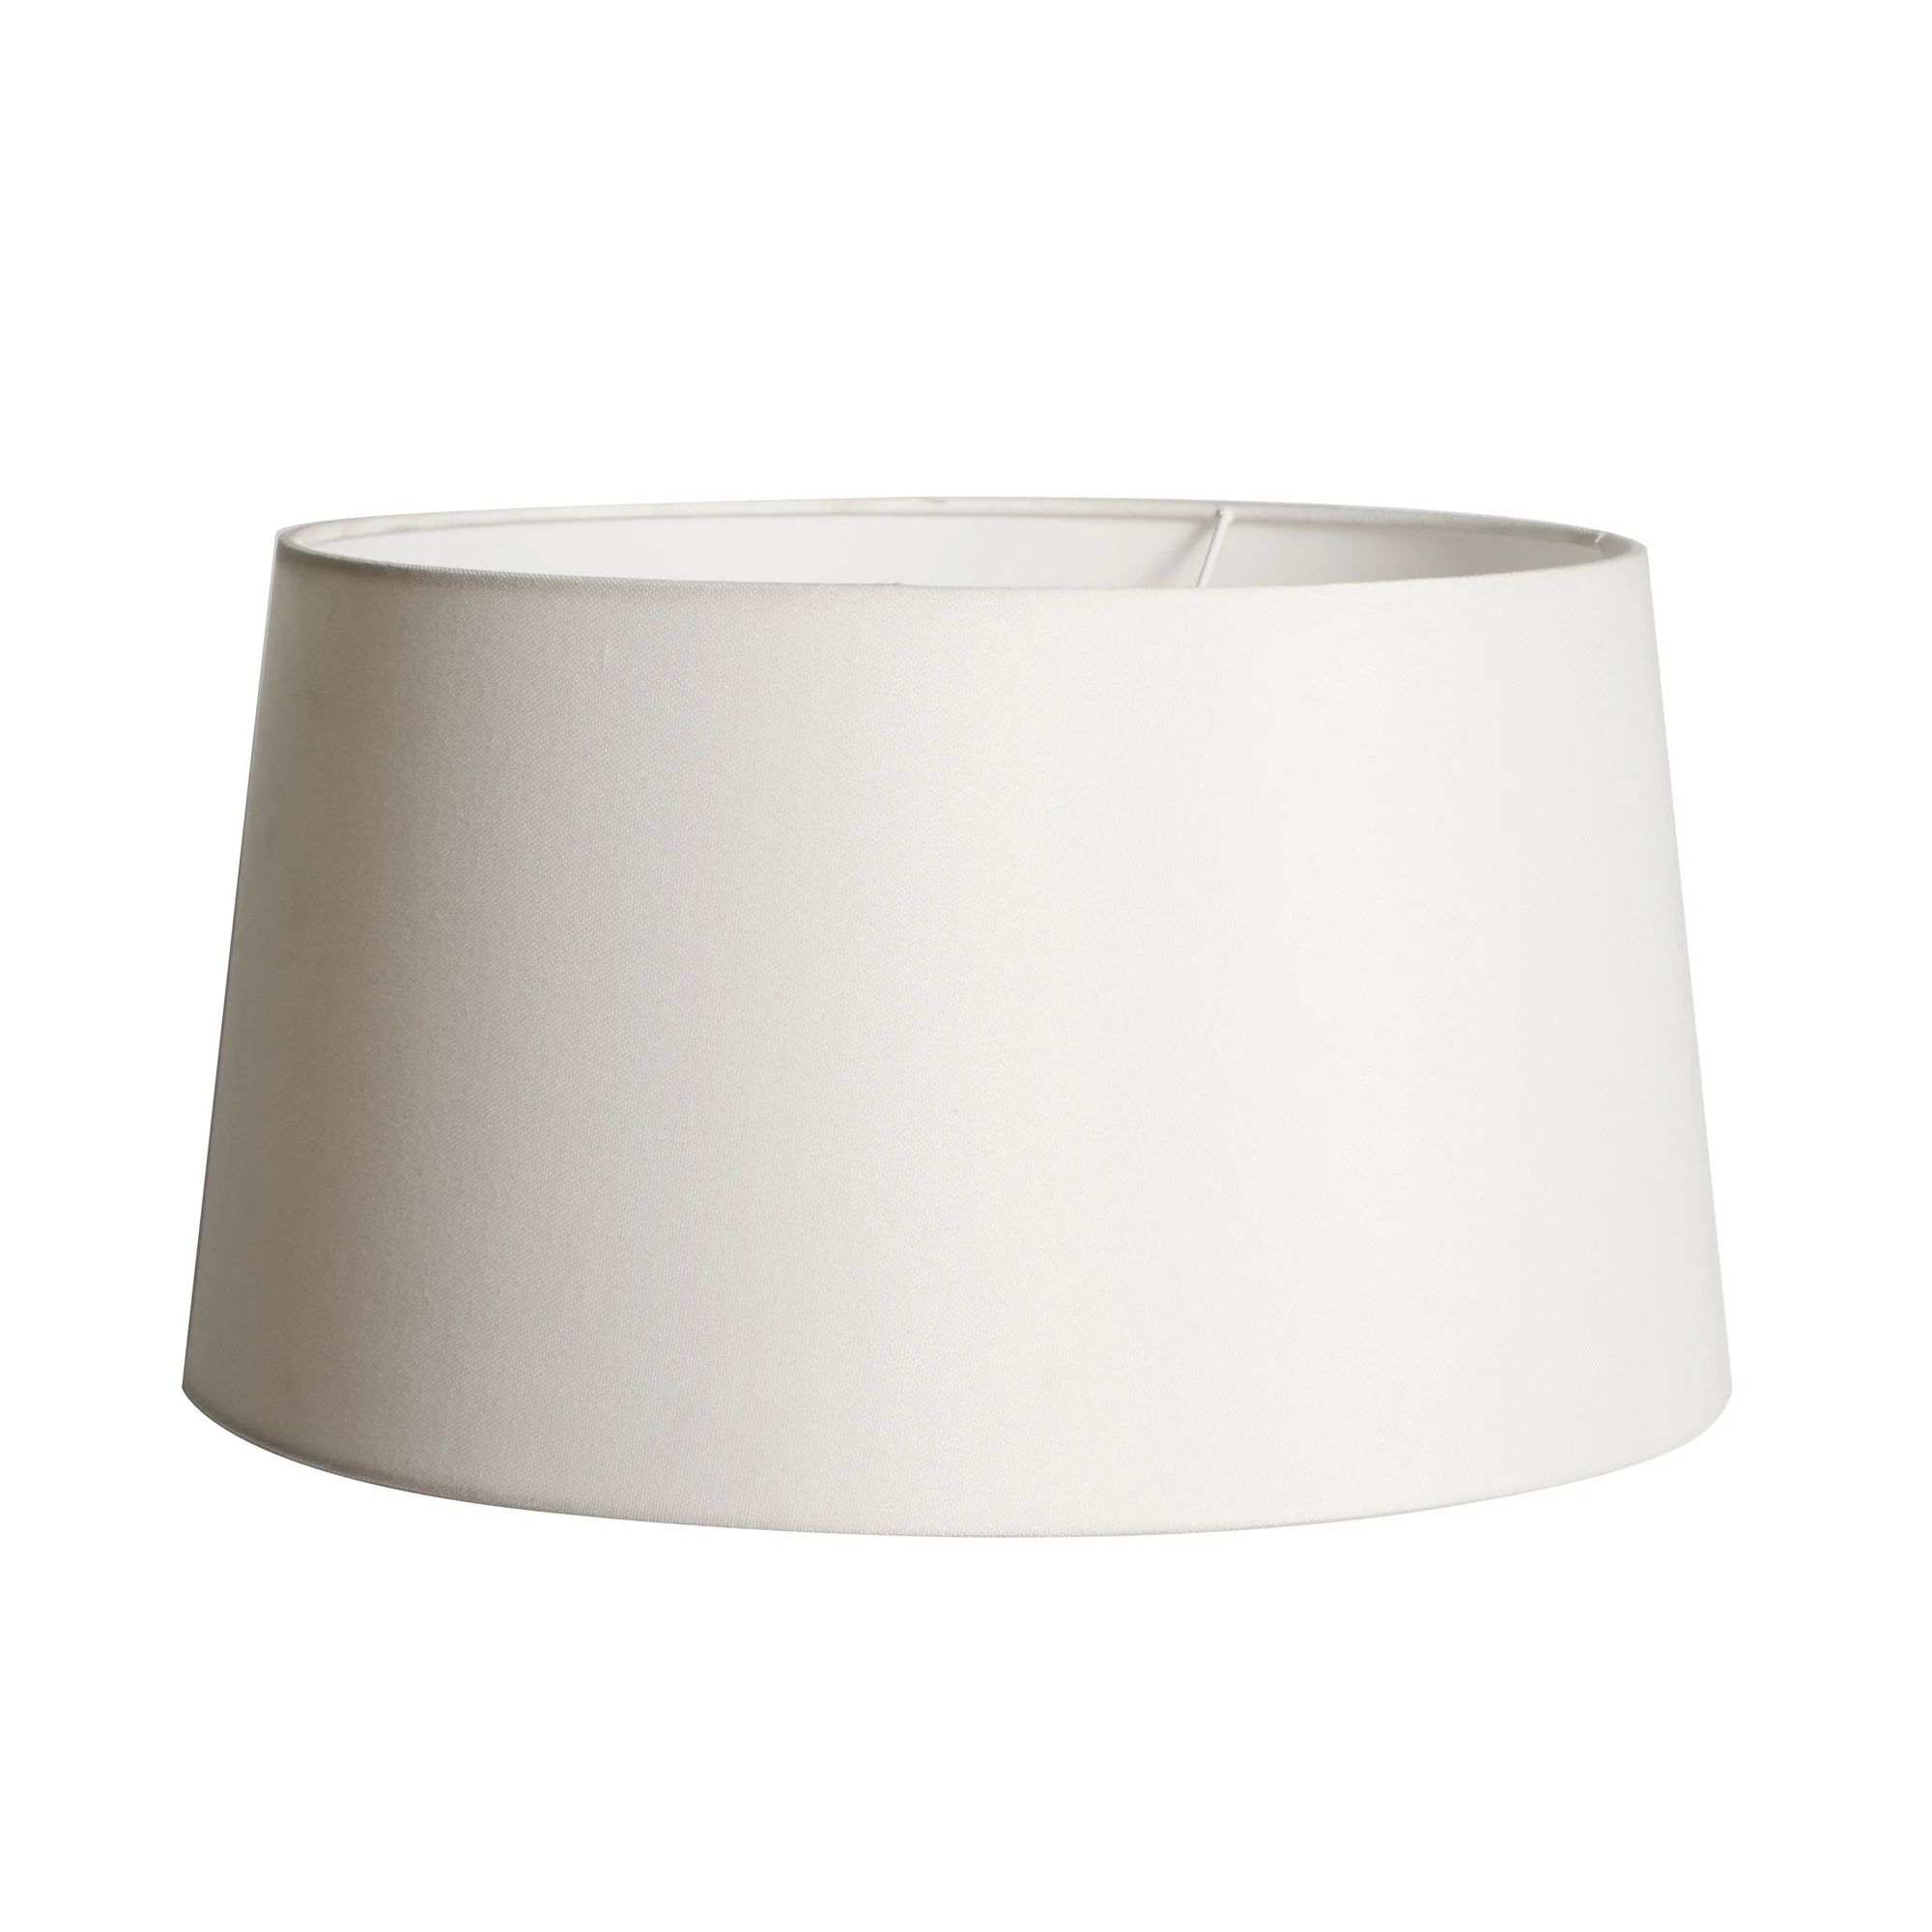 Simplee Adesso White Fabric Uno Lamp Shade, 8.5"H x 15.5"D, Transitional, Adult, Dorm Room Use | Walmart (US)